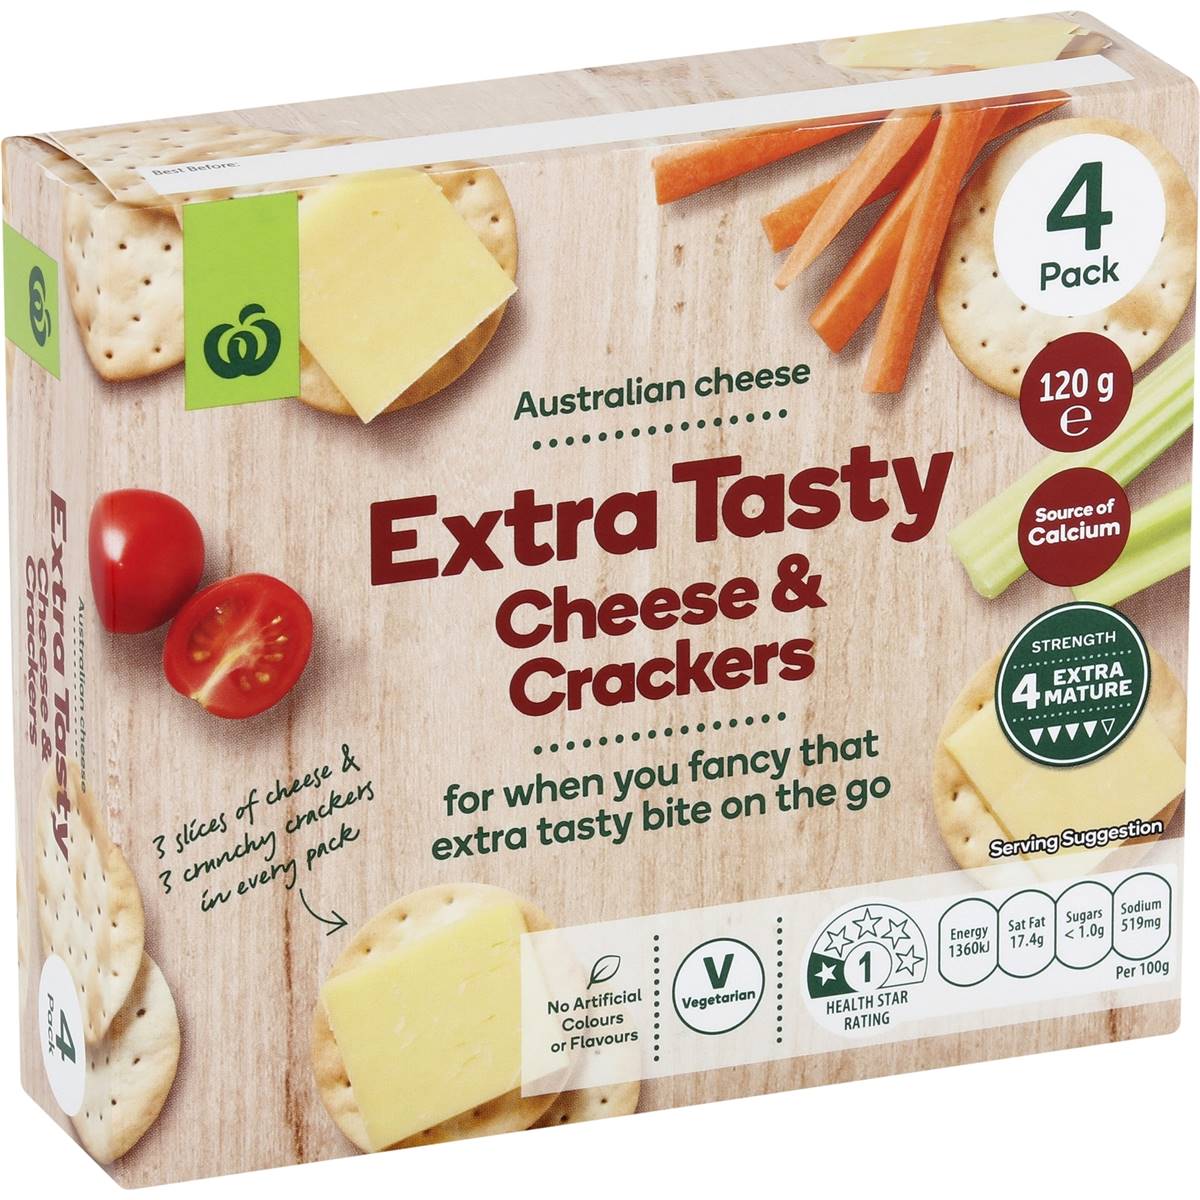 Calories in Woolworths Extra Tasty Cheese & Crackers